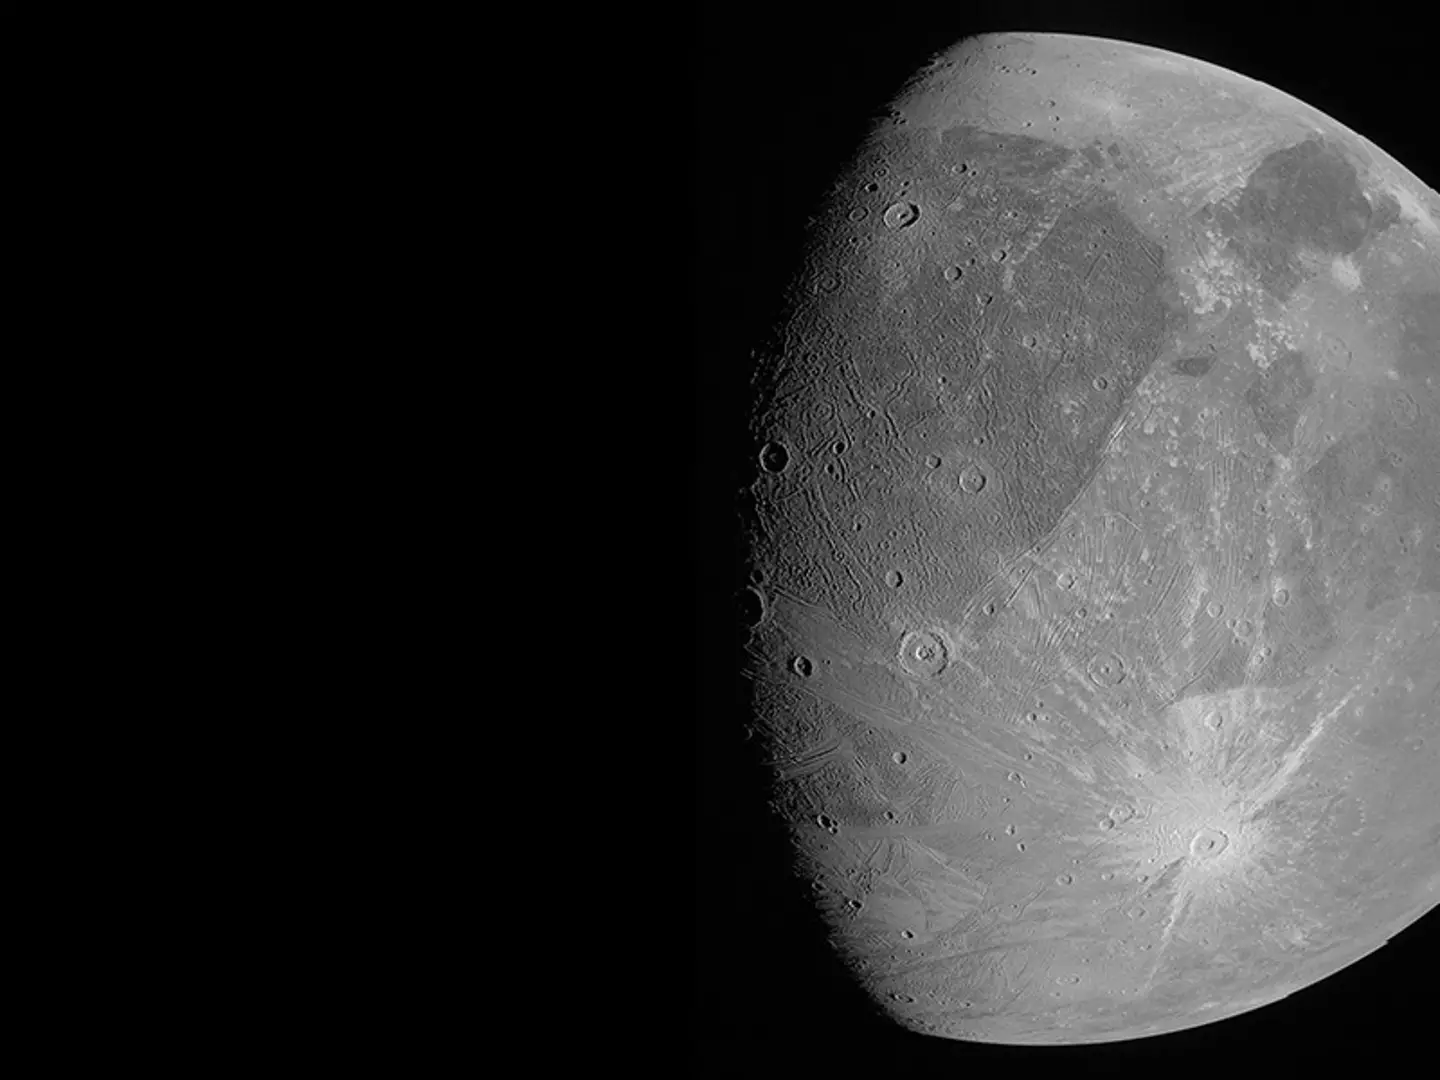 The incredible image of Ganymede was captured by the Juno spacecraft.